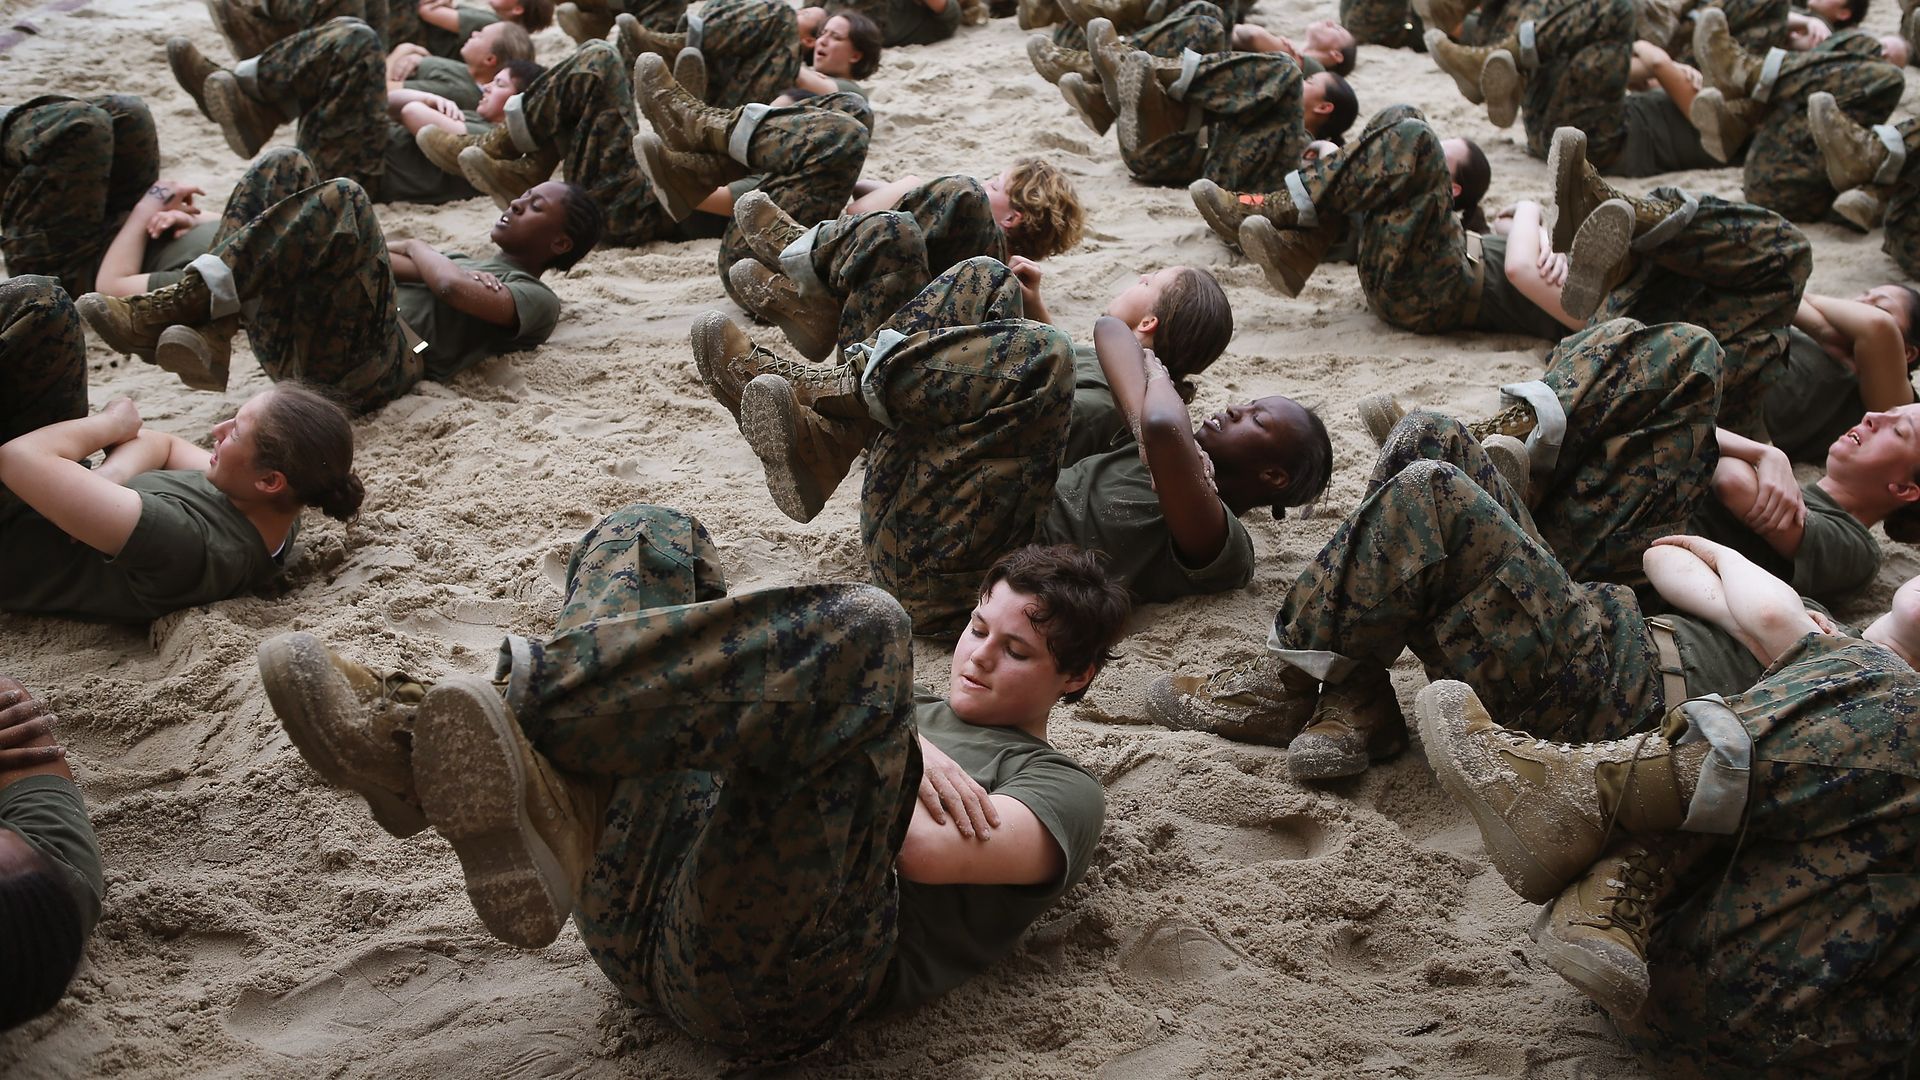 Boot camp training in a sand pit